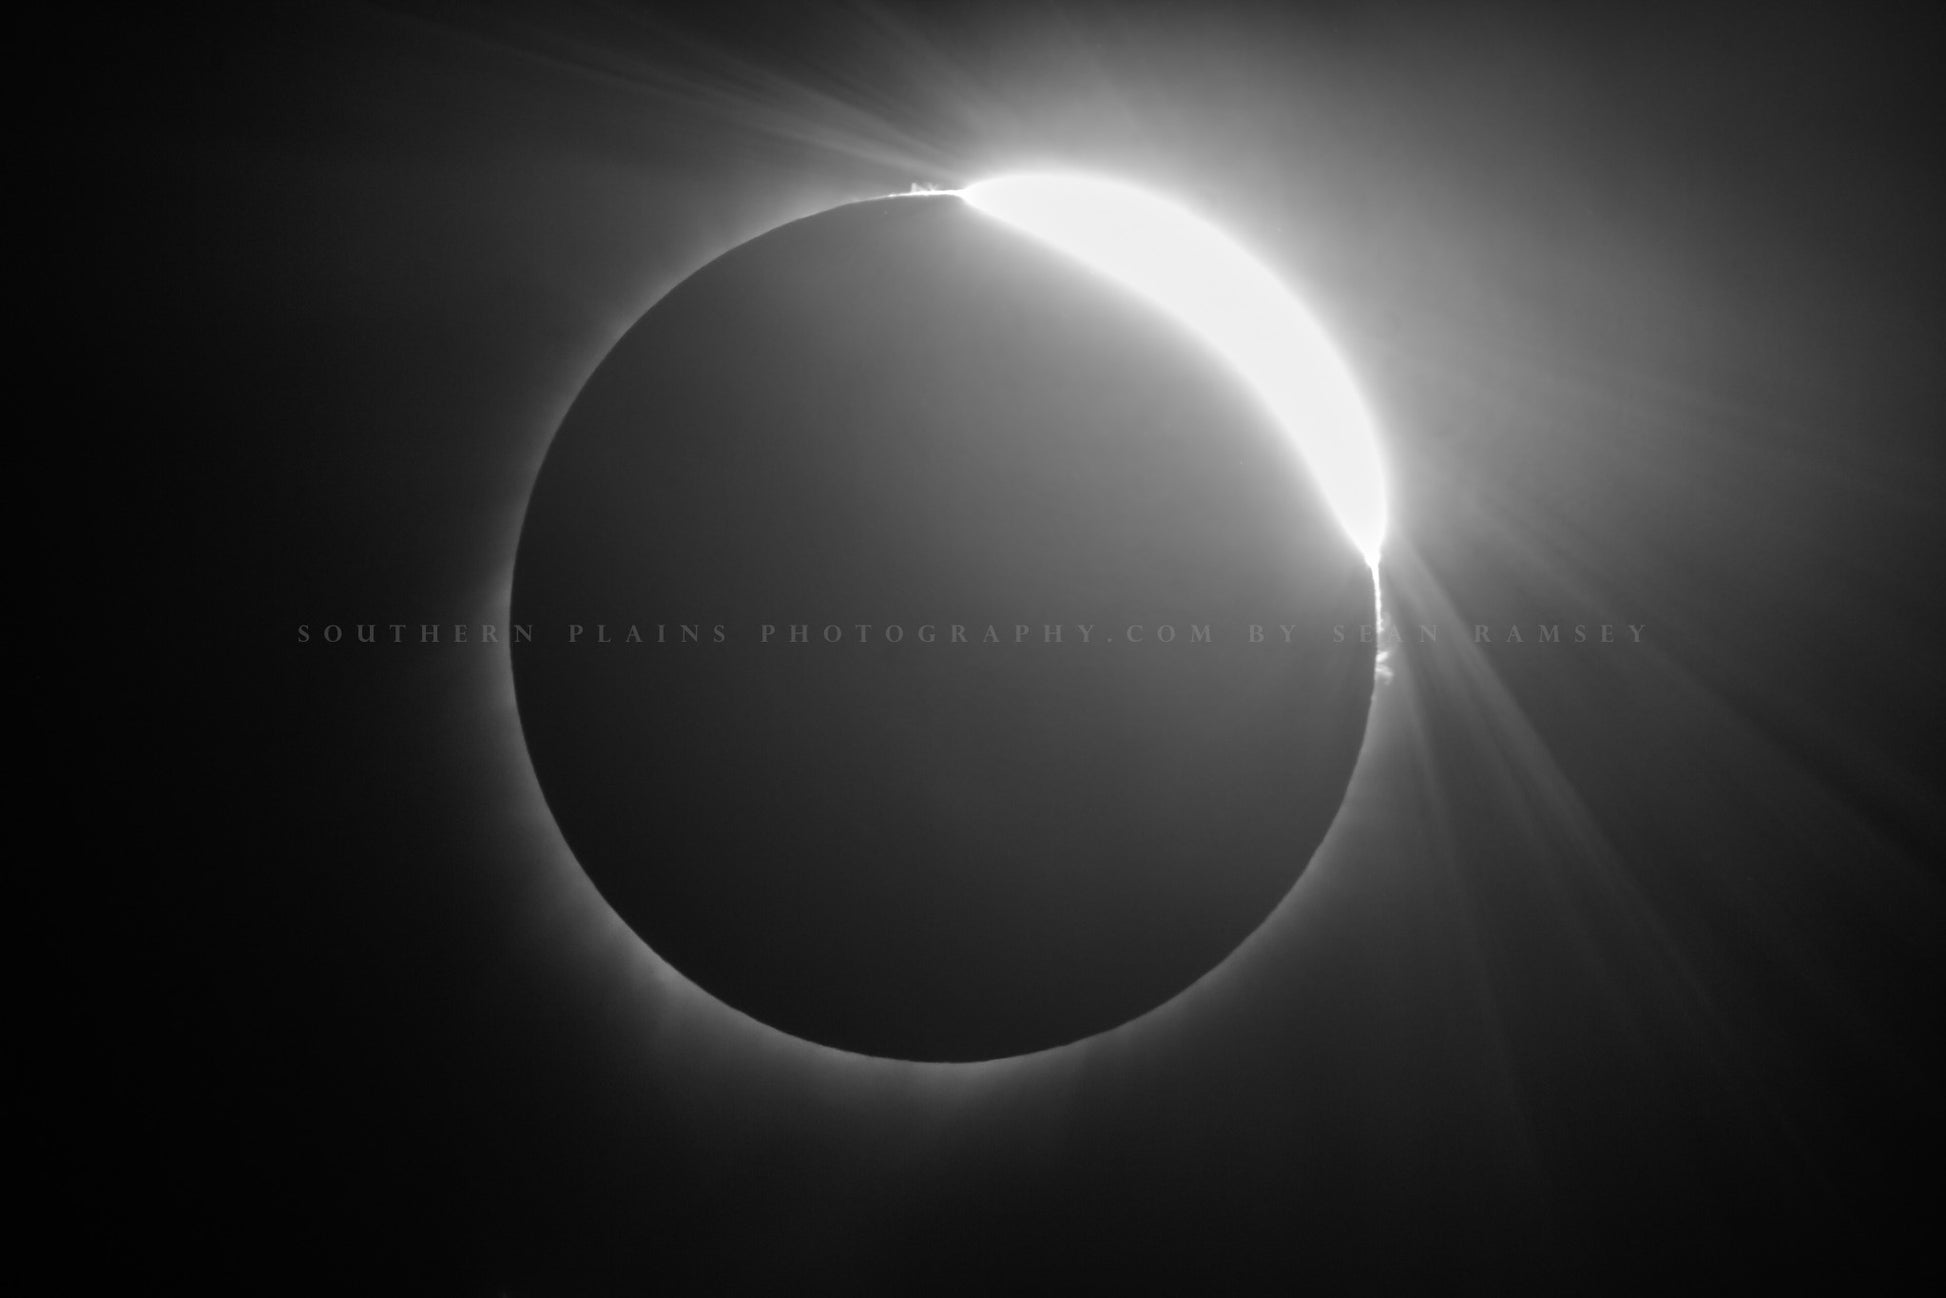 Celestial photography print of a total solar eclipse with the diamond ring effect as it exits totality in the Nebraska sky by Sean Ramsey of Southern Plains Photography.